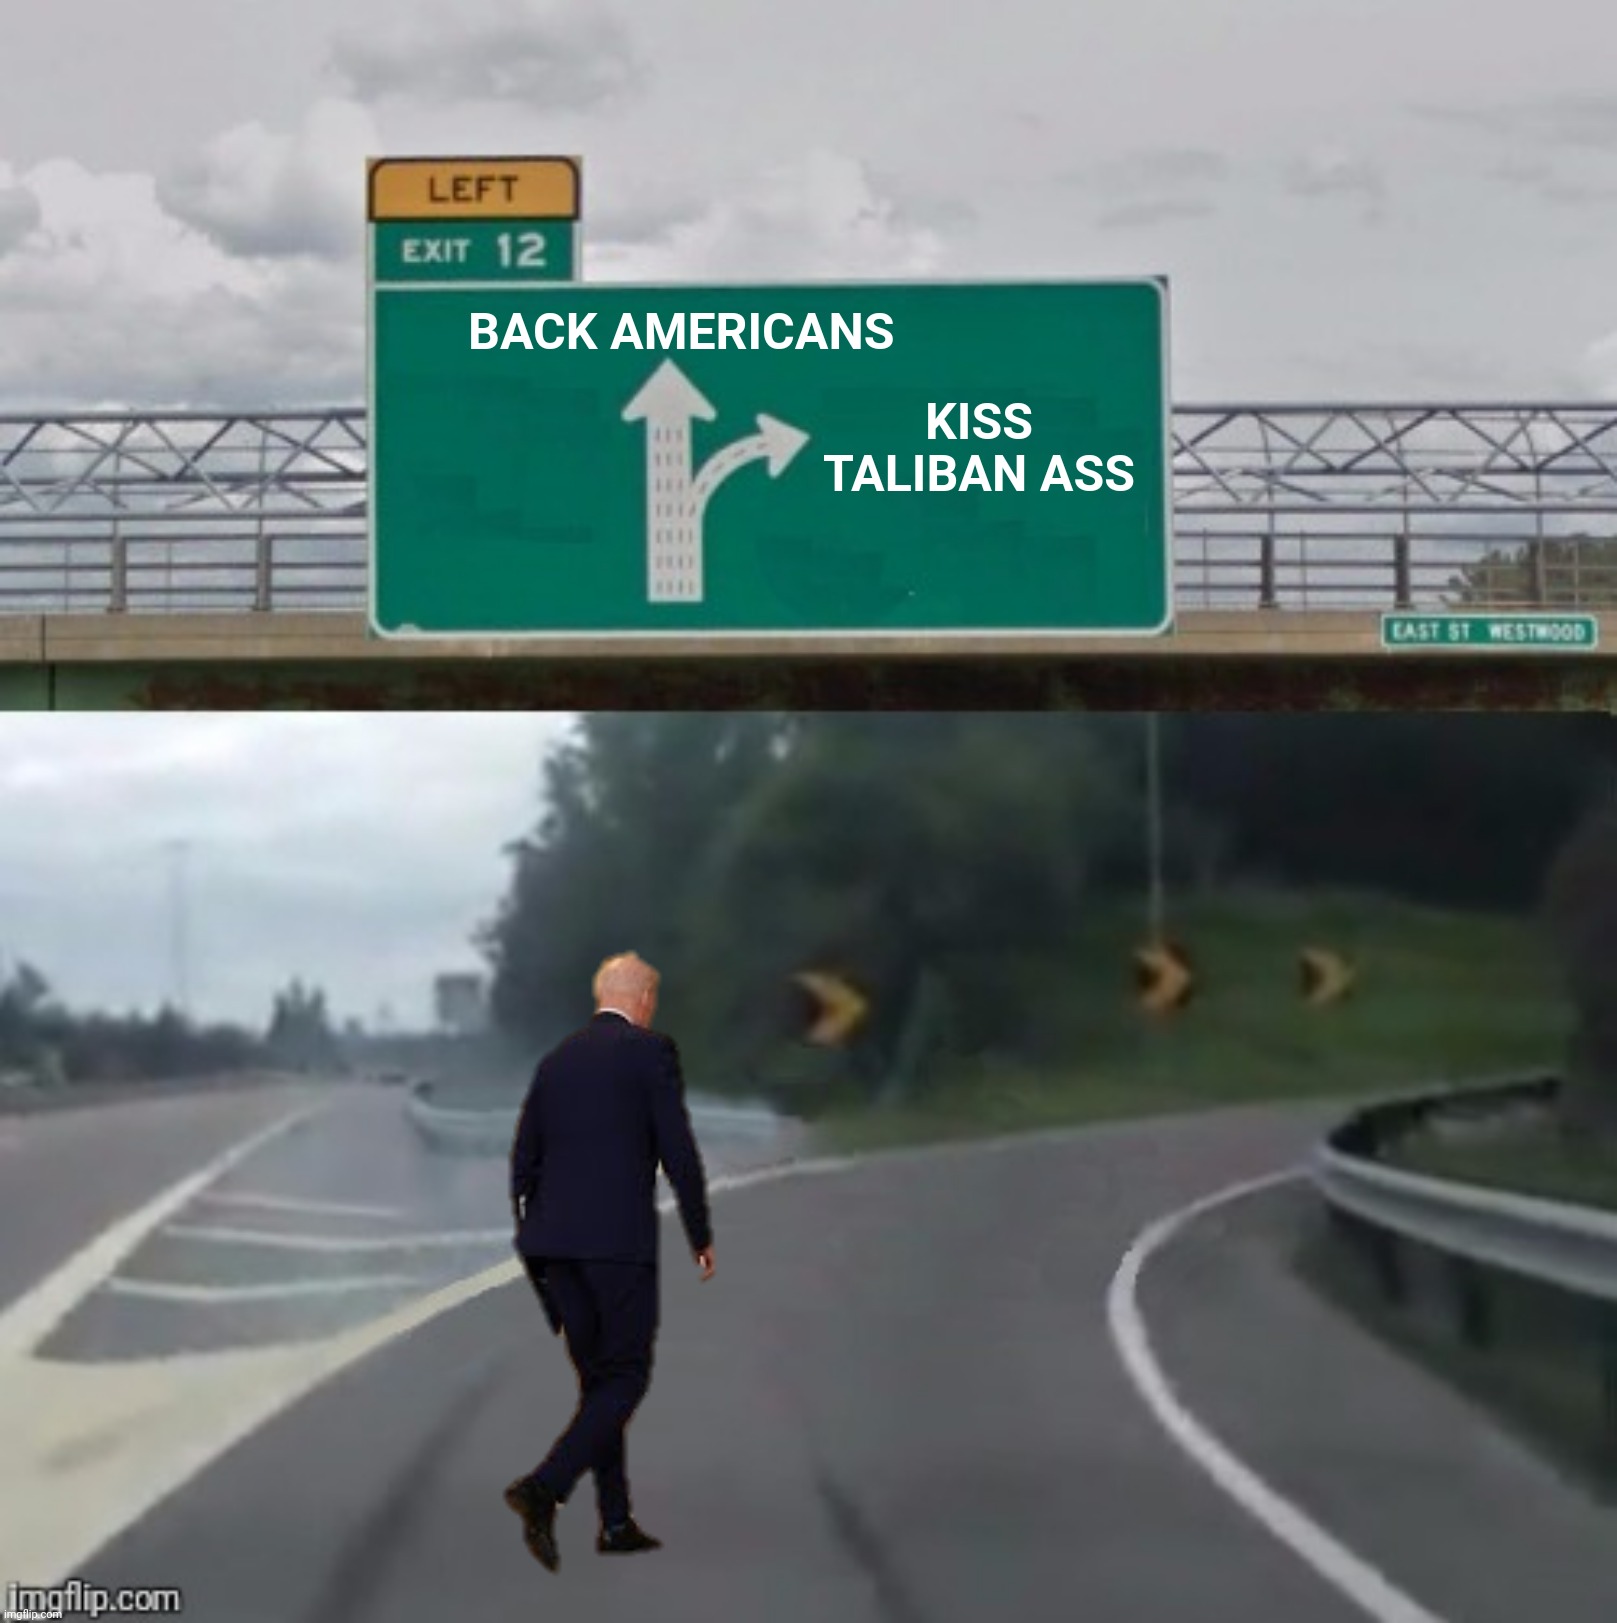 Leading with your behind | KISS TALIBAN ASS; BACK AMERICANS | image tagged in bad photoshop,joe biden,left exit 12 off ramp,afghanistan,taliban | made w/ Imgflip meme maker